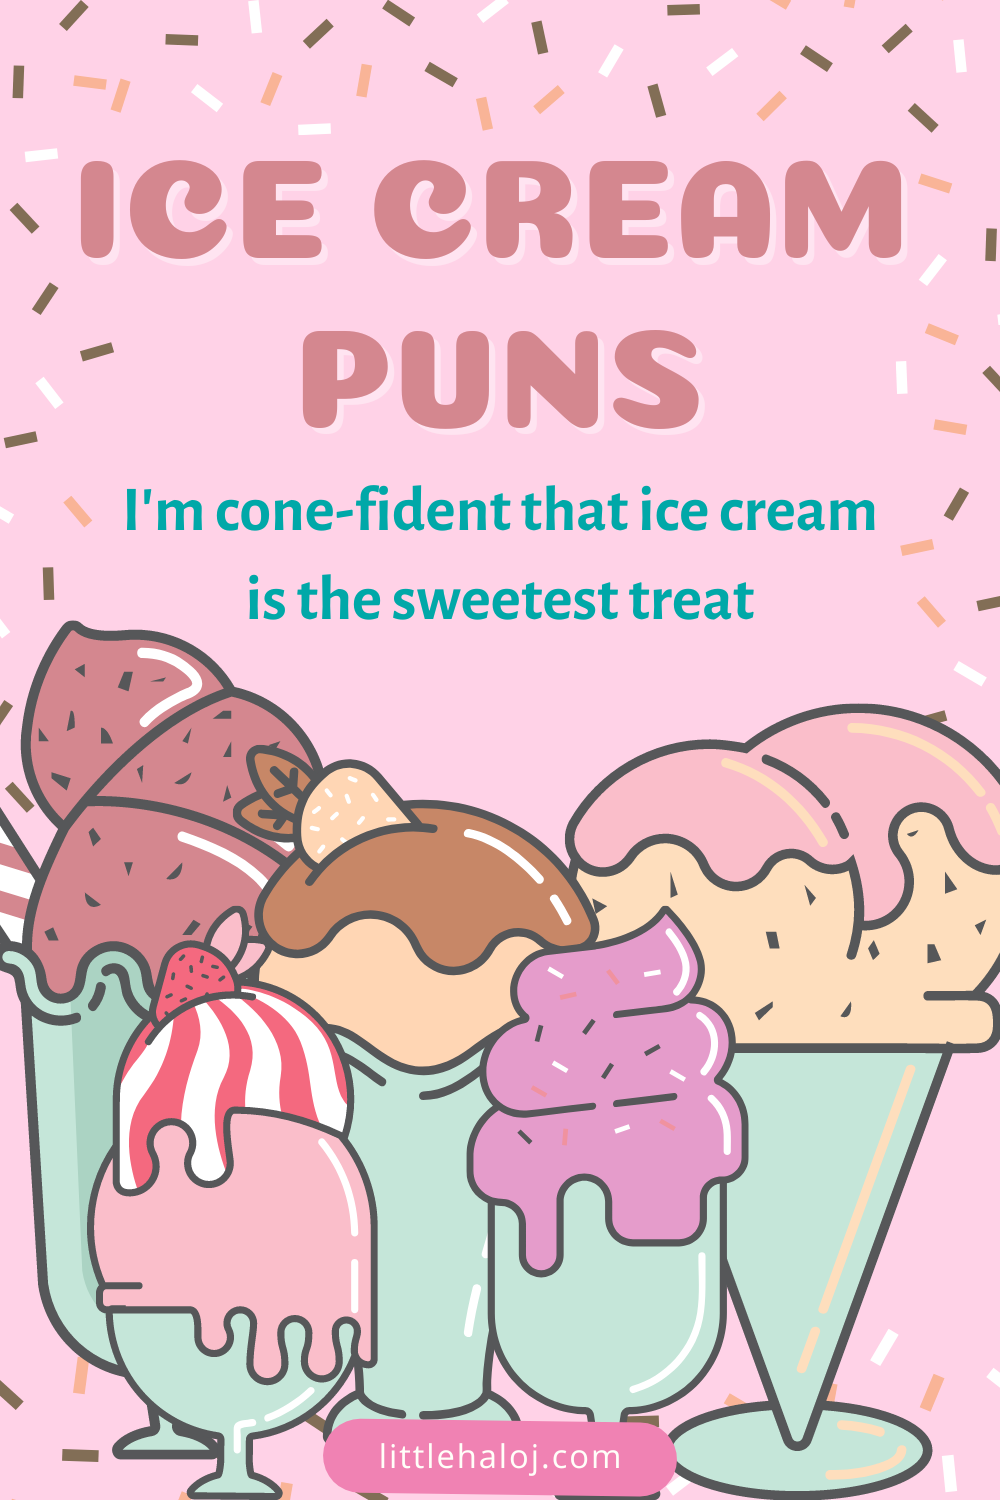 Who doesn't love a good pun or joke every once in a while, especially when it involves ice cream? If you need a little bit of humor in your life, look no further than these ice cream puns and jokes that will surely tickle your funny bone.